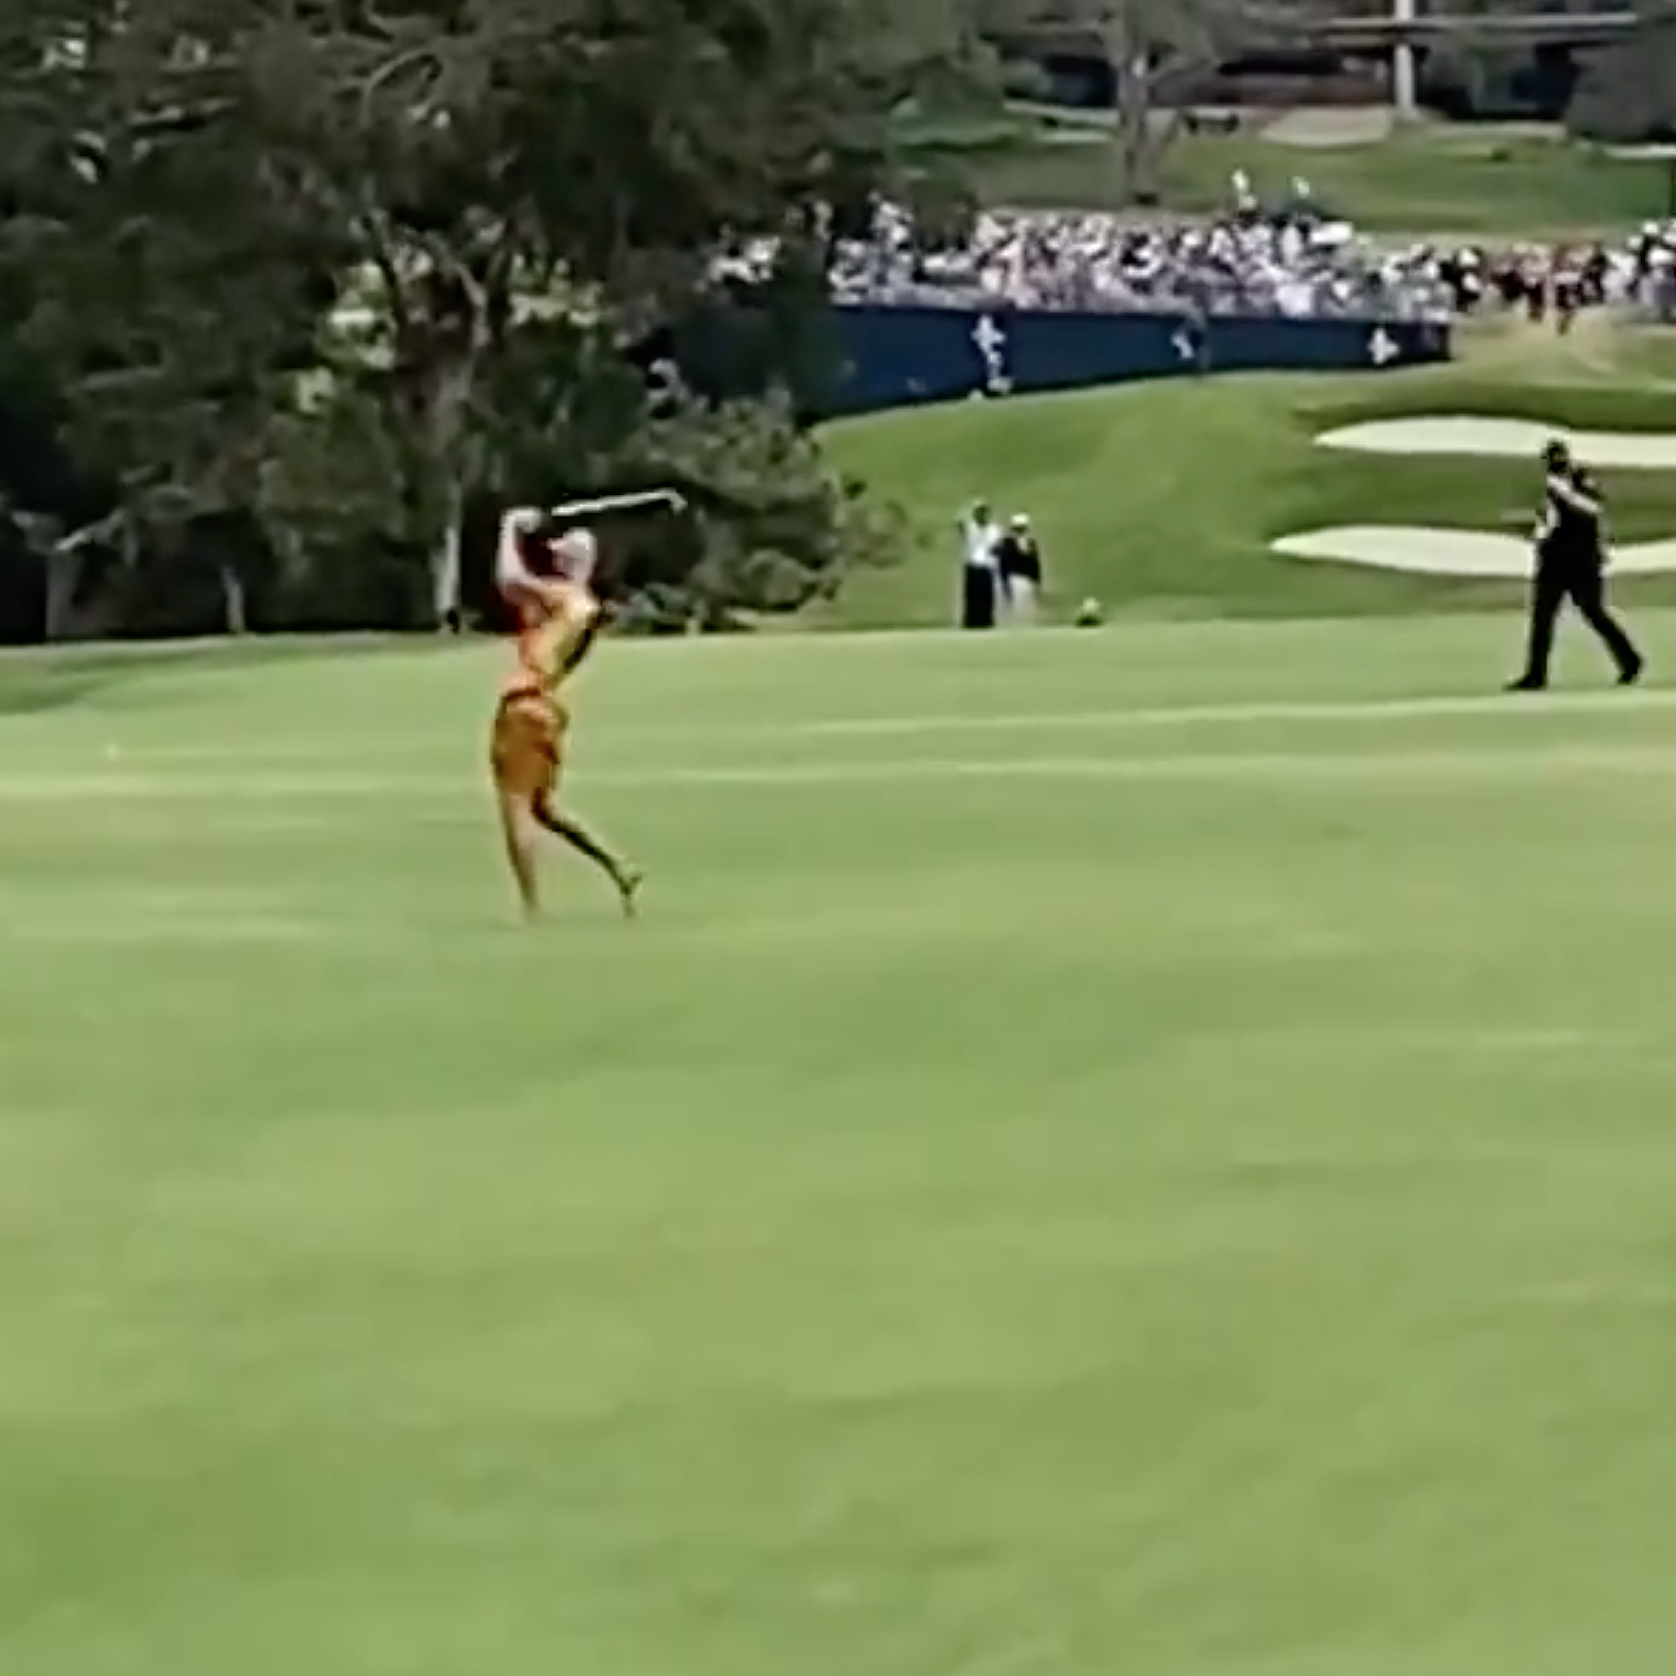 U S Open 2021 Random Fan Sneaks Onto Torrey Pines And Takes A Few Swings In The Fairway Actually Has A Pretty Nice Swing This Is The Loop Golf Digest